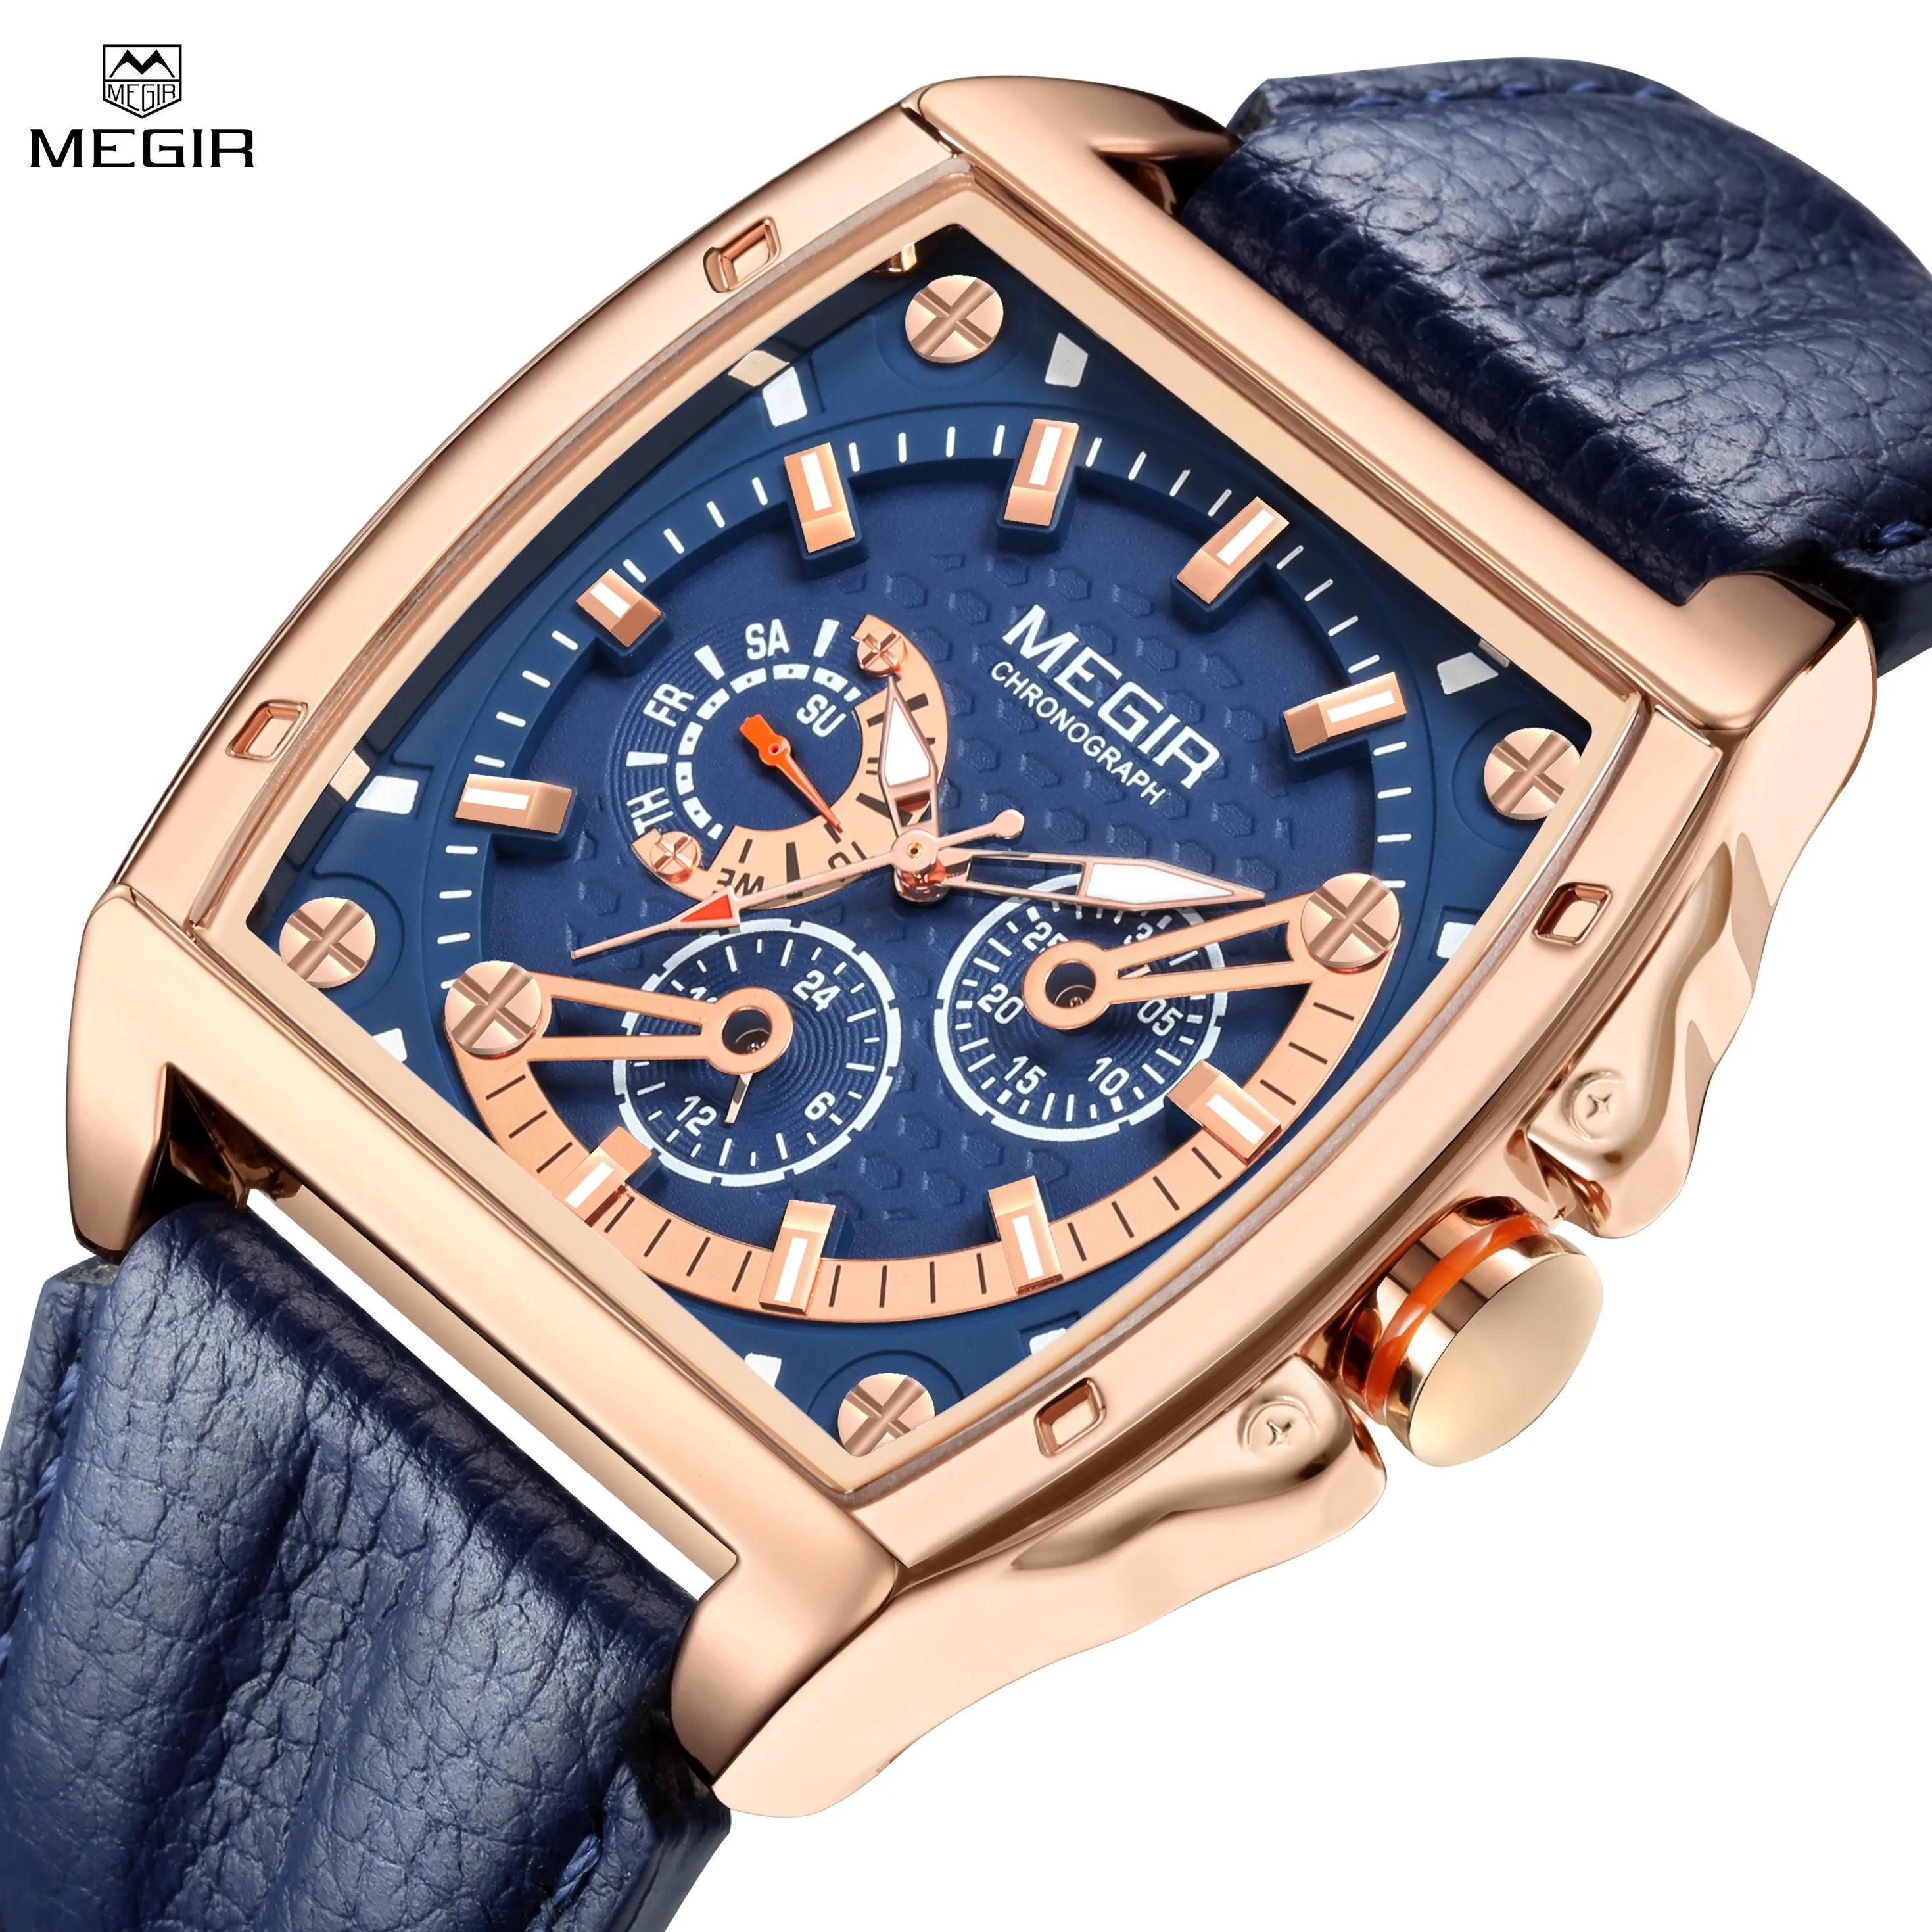 New Arrival Fashion Brand Luxury Waterproof Military Leather Sport Quartz Chronograph Date Mens Watches - The Jewellery Supermarket